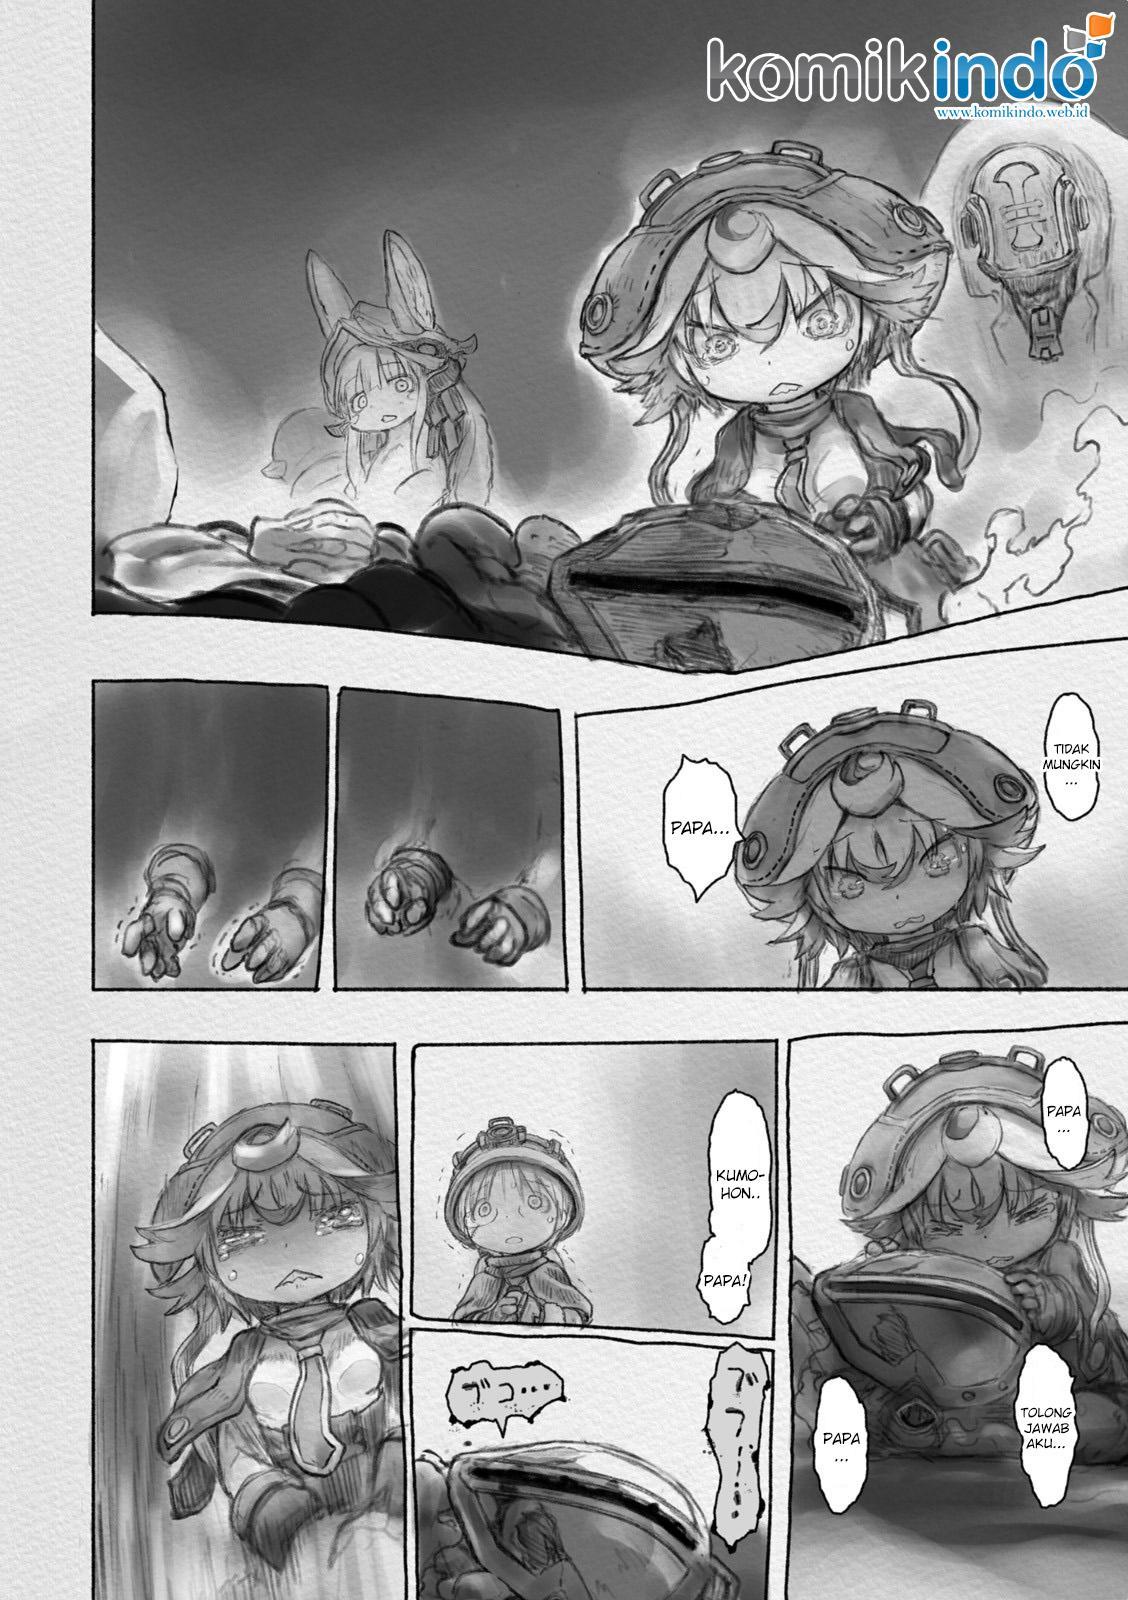 Made in Abyss Chapter 32